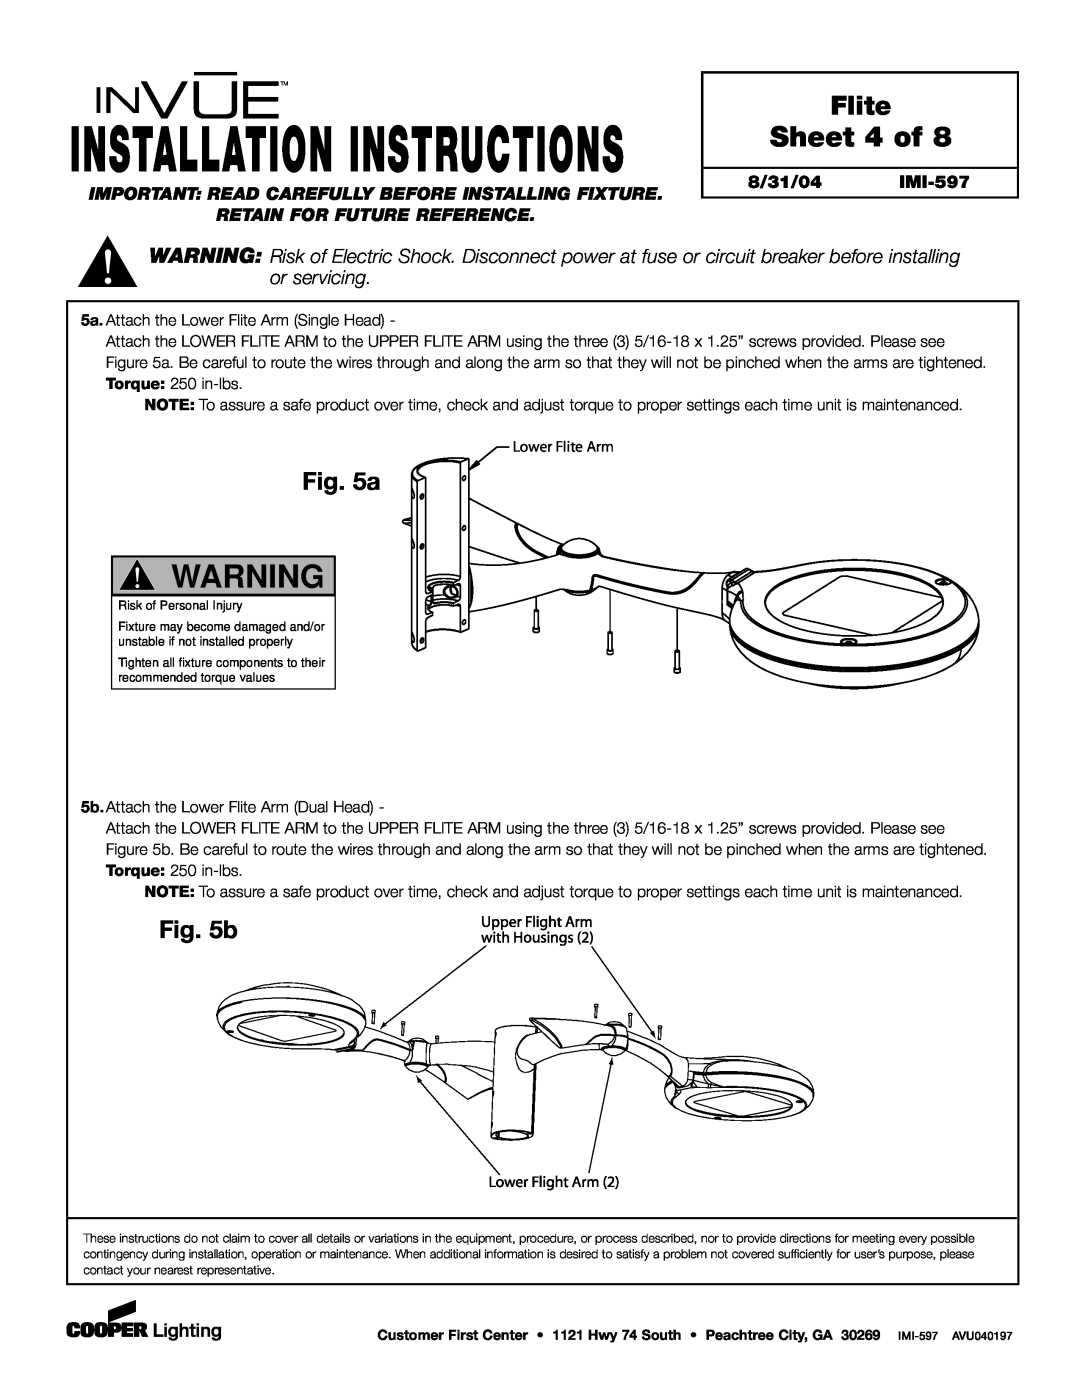 Cooper Lighting Sheet 4 of, b, Installation Instructions, Flite, Retain For Future Reference, 8/31/04 IMI-597 